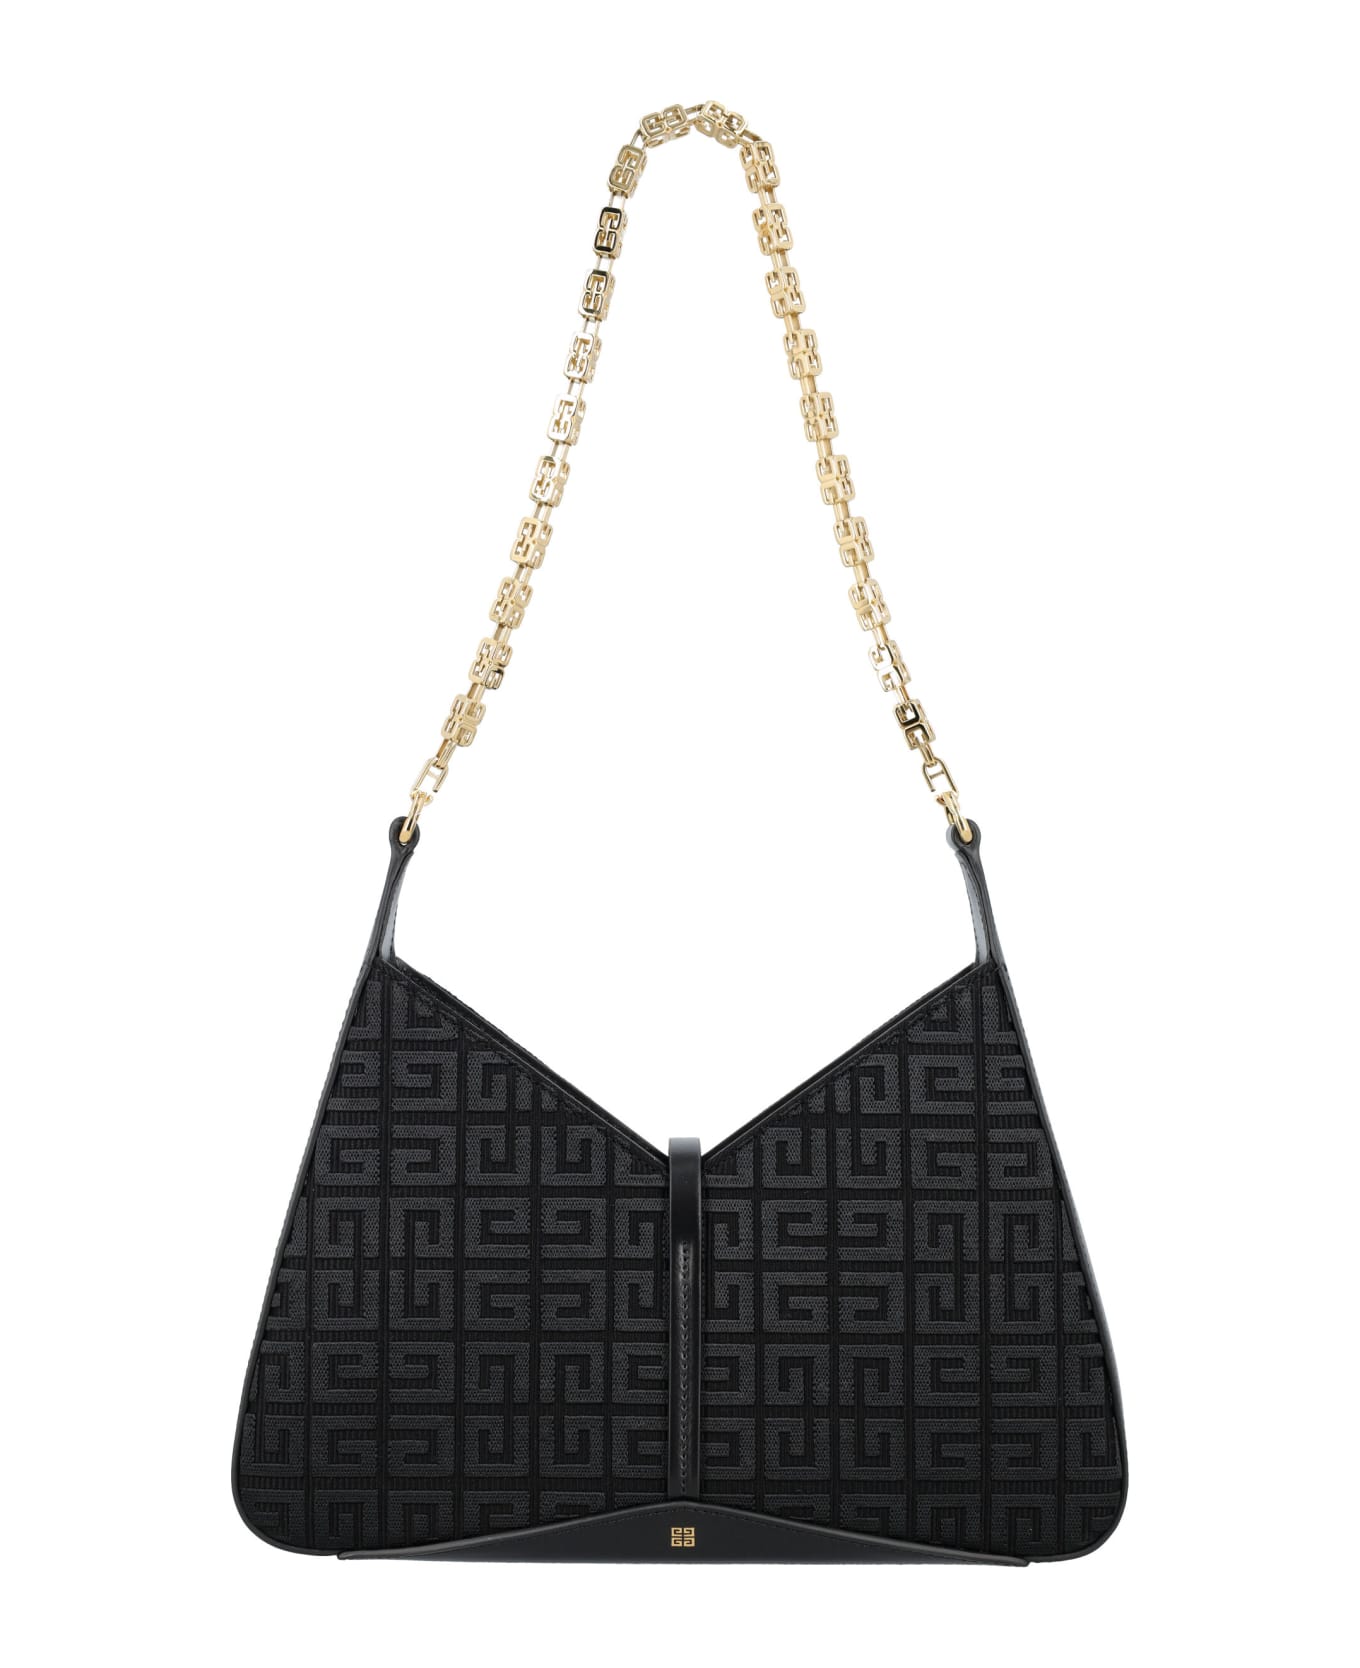 Givenchy Cut-out Zipped Small Bag - BLACK